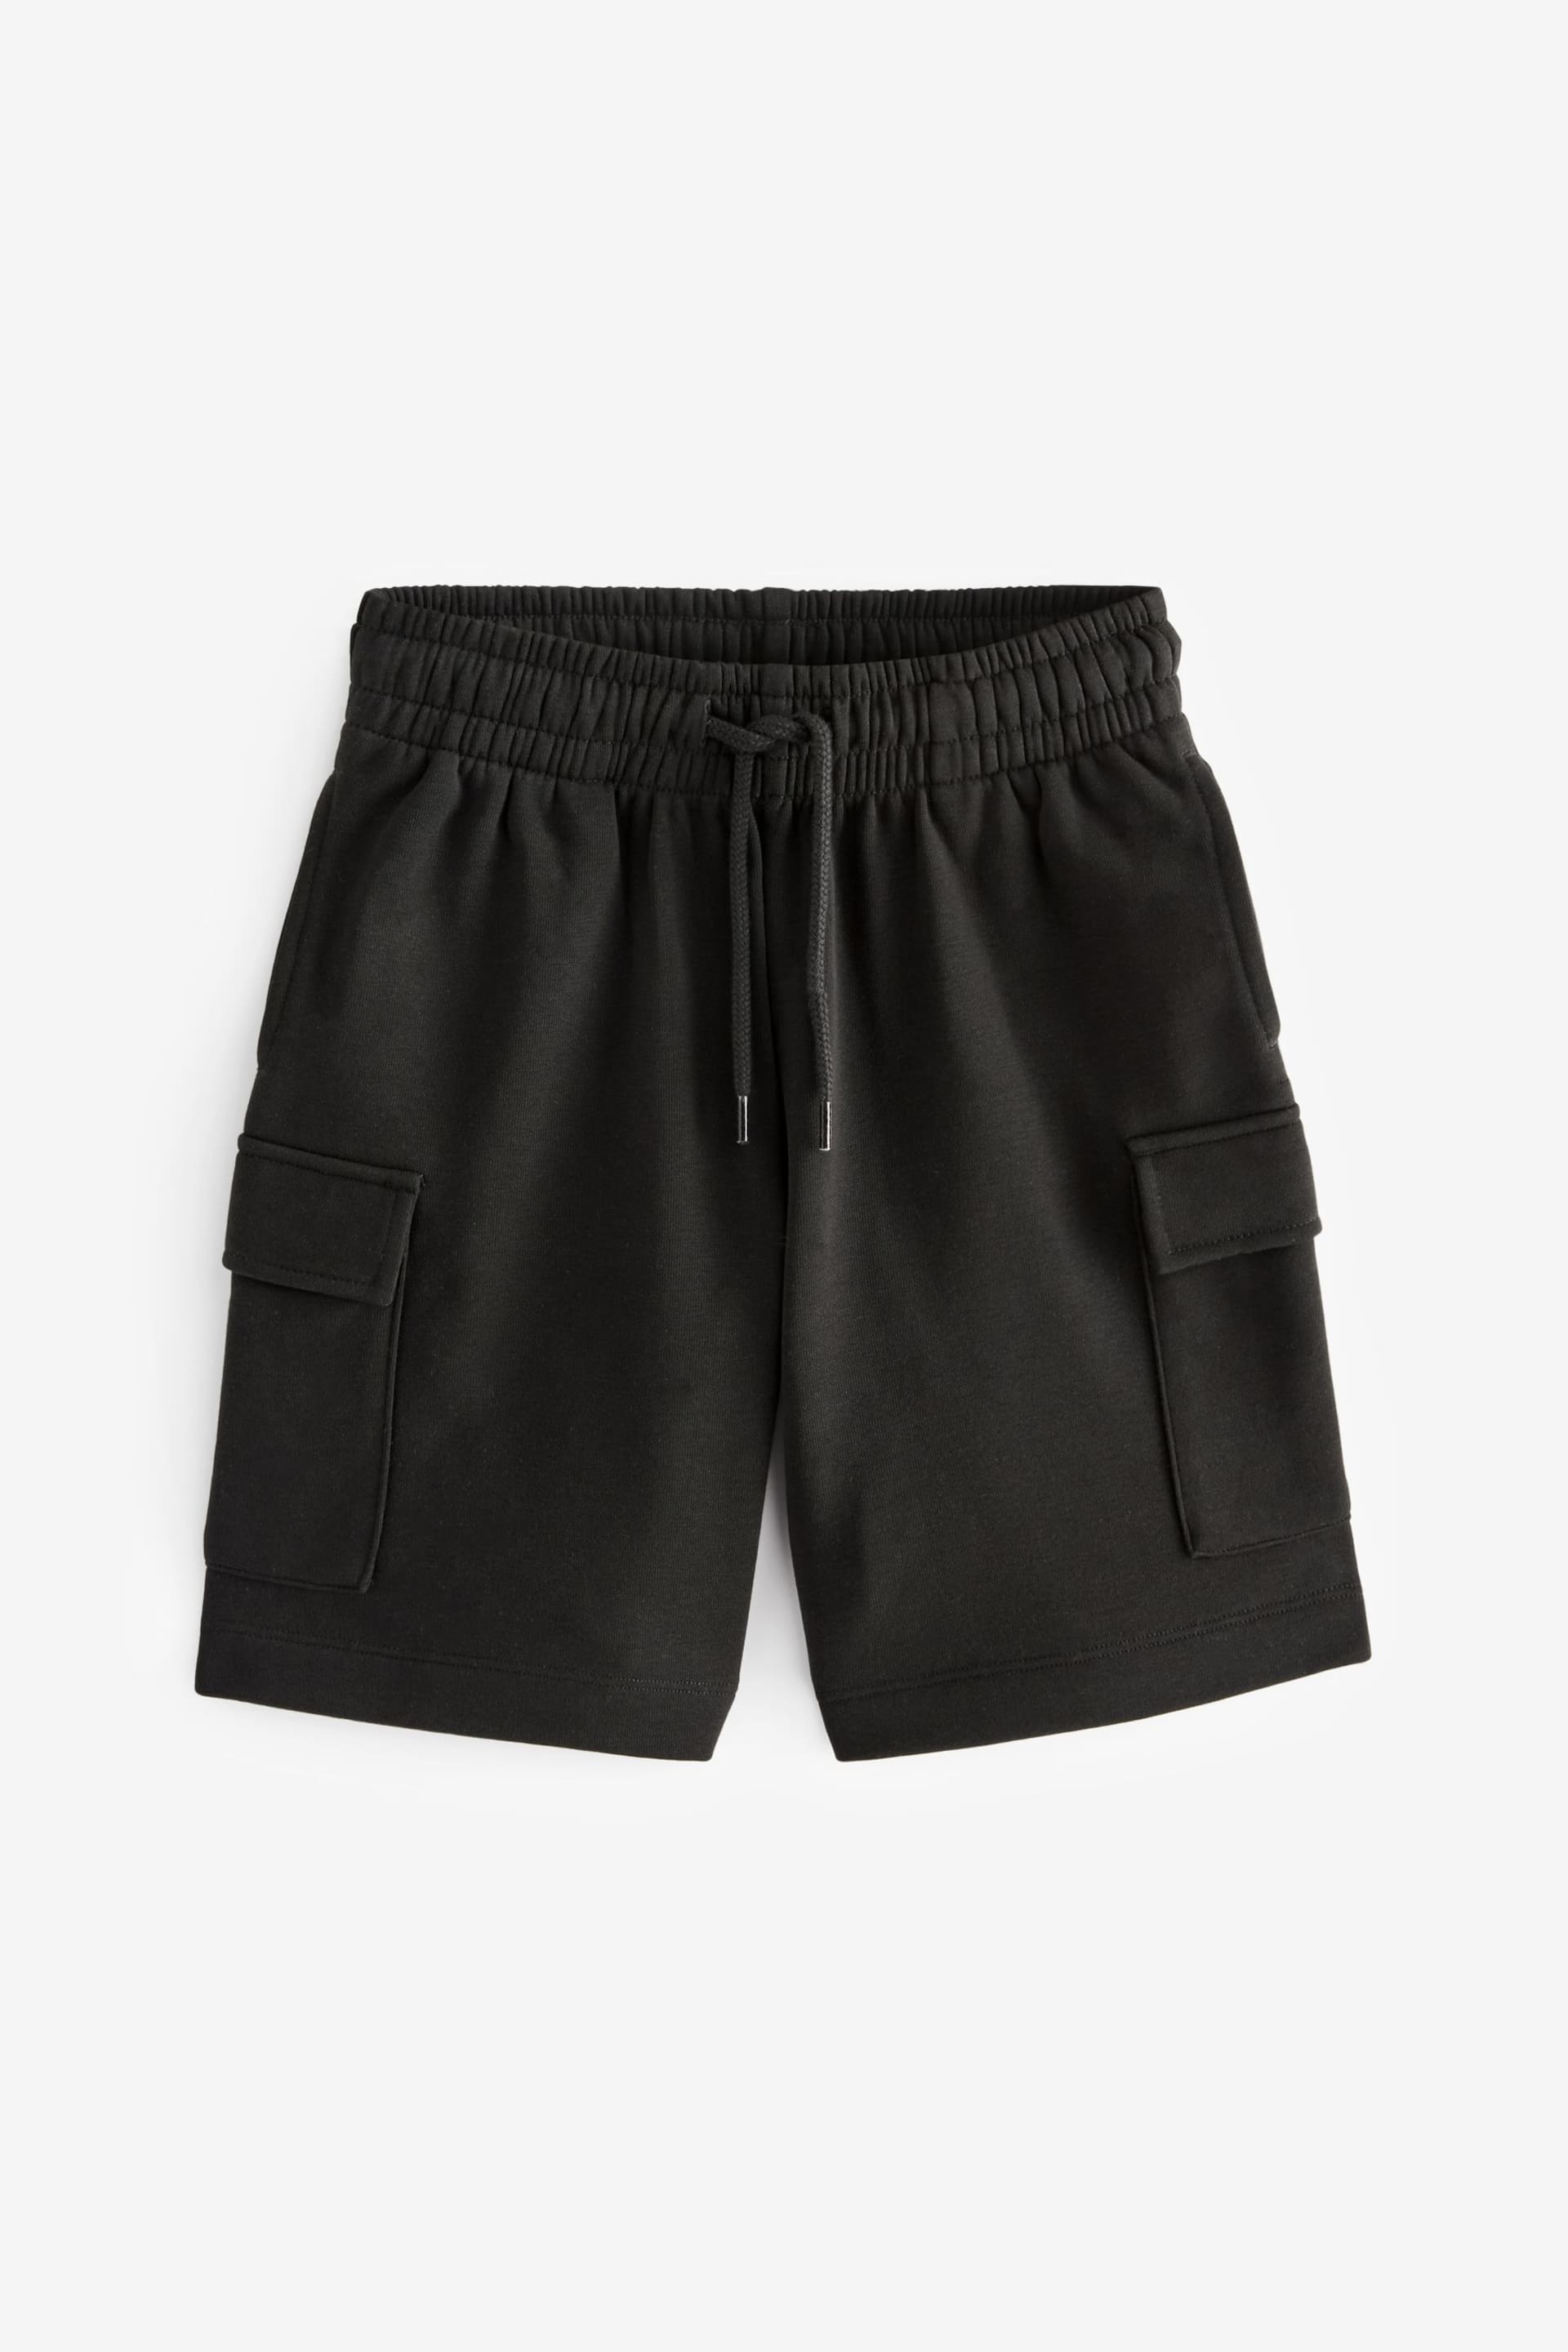 Black/Green 2 Pack Cargo Jersey Shorts (3-16yrs) - Image 3 of 4